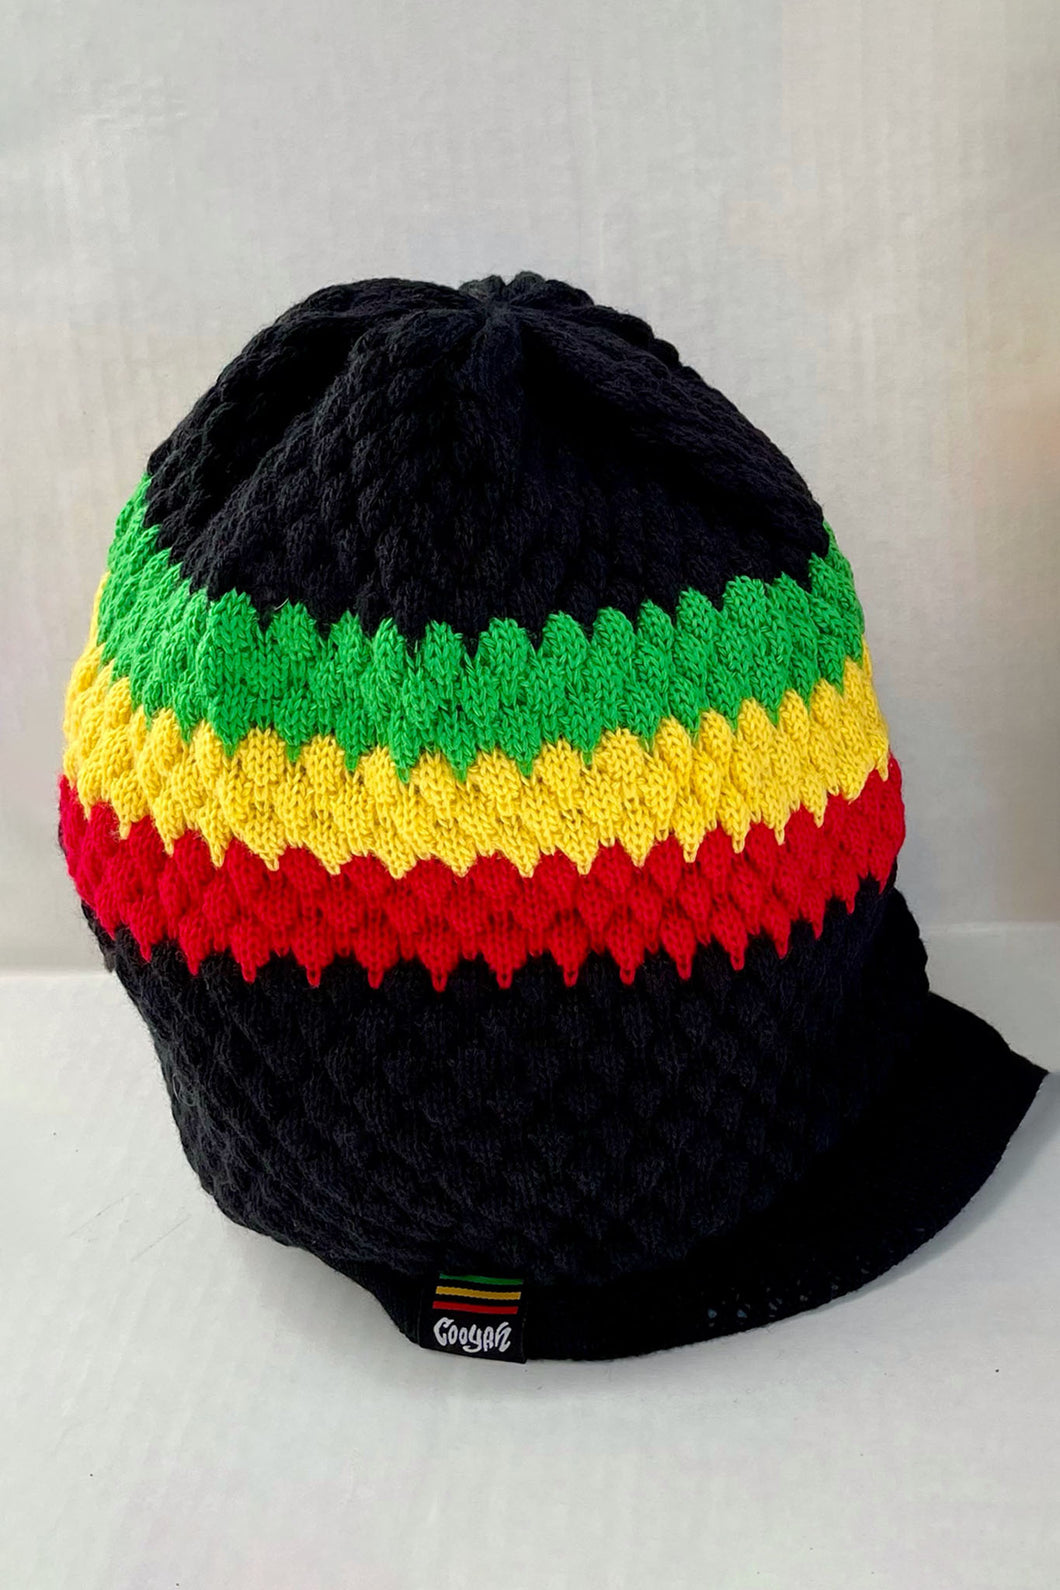 Cooyah Jamaica. Knit Rasta Tam with brim. Jamaican rootswear clothing brand. The perfect hat for dread locks. IRIE